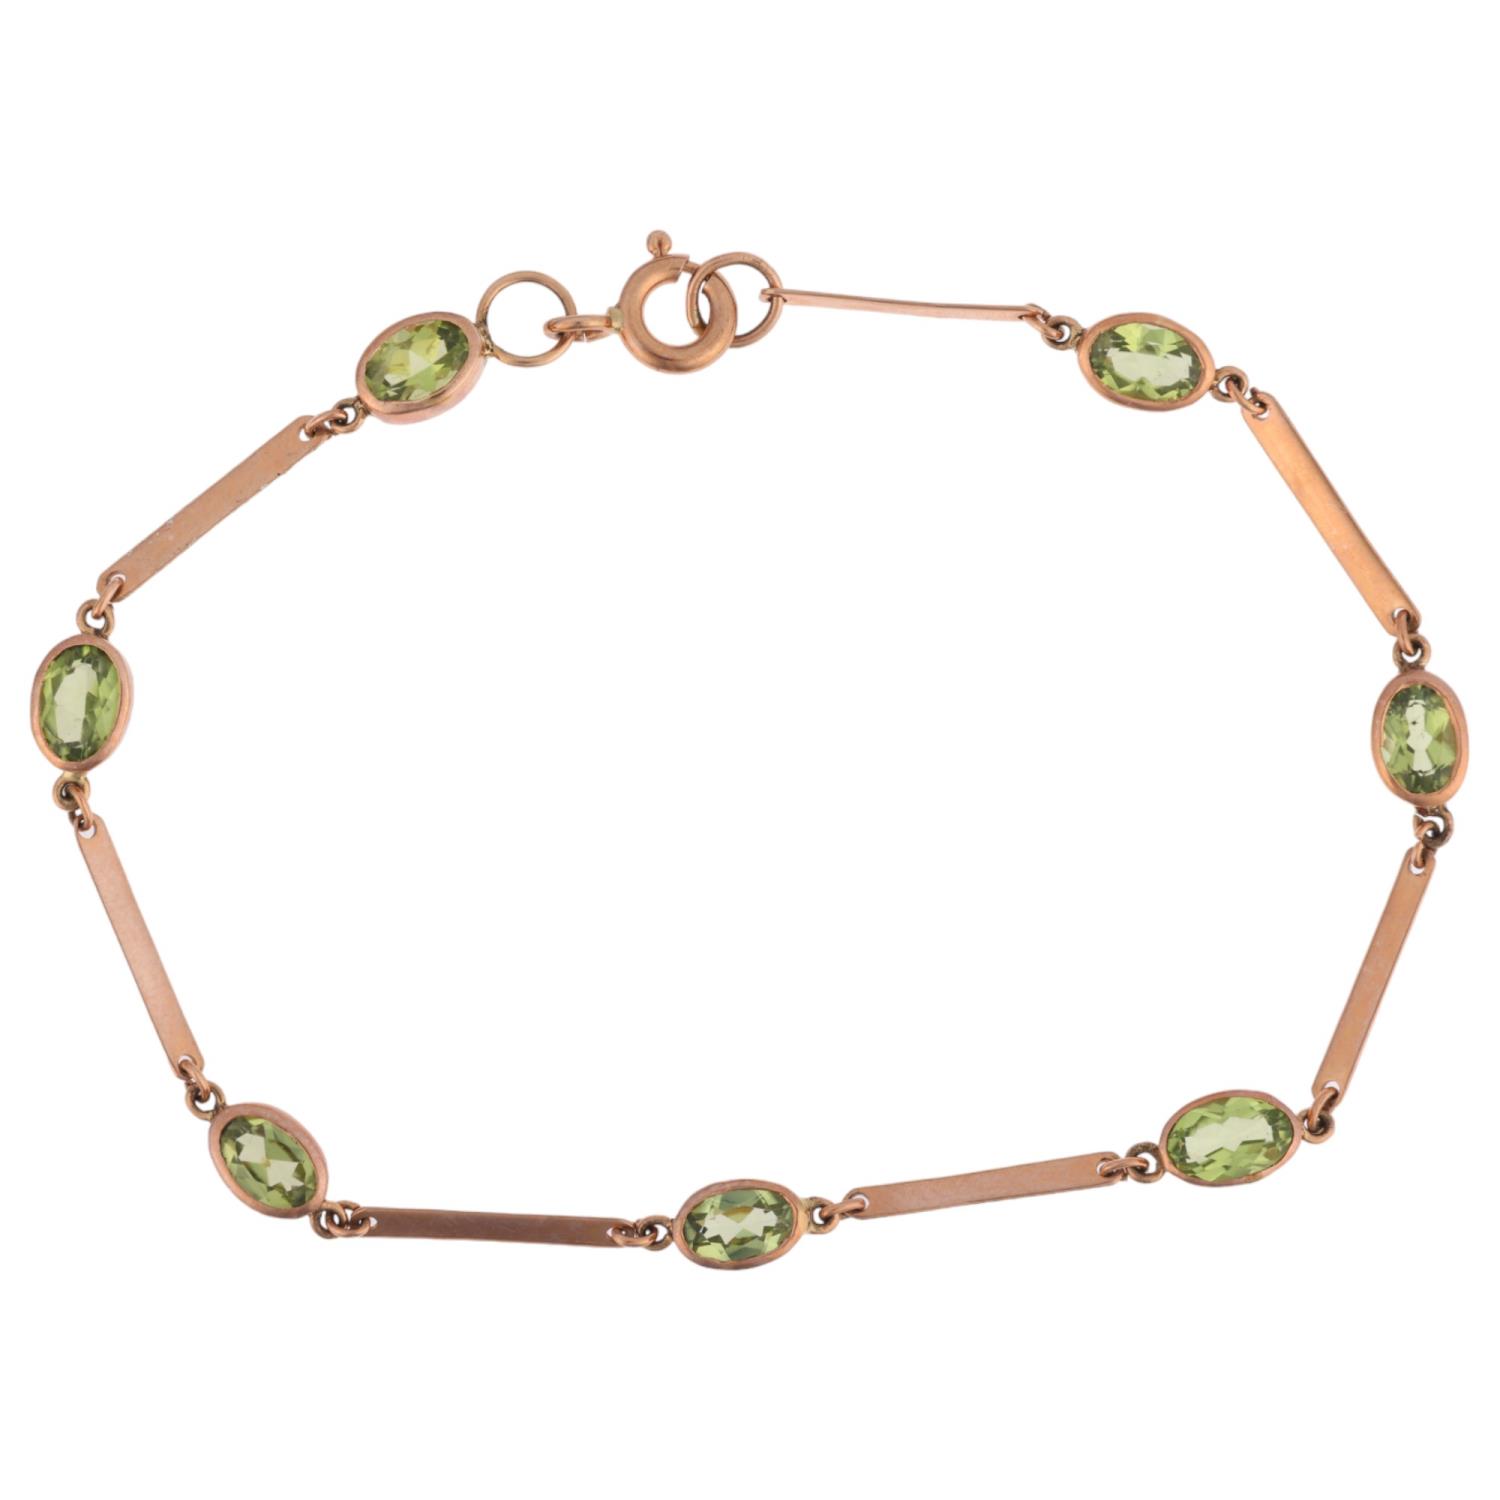 A 9ct rose gold peridot tennis line bracelet, maker SA, London 2011, rub-over set with oval mixed-